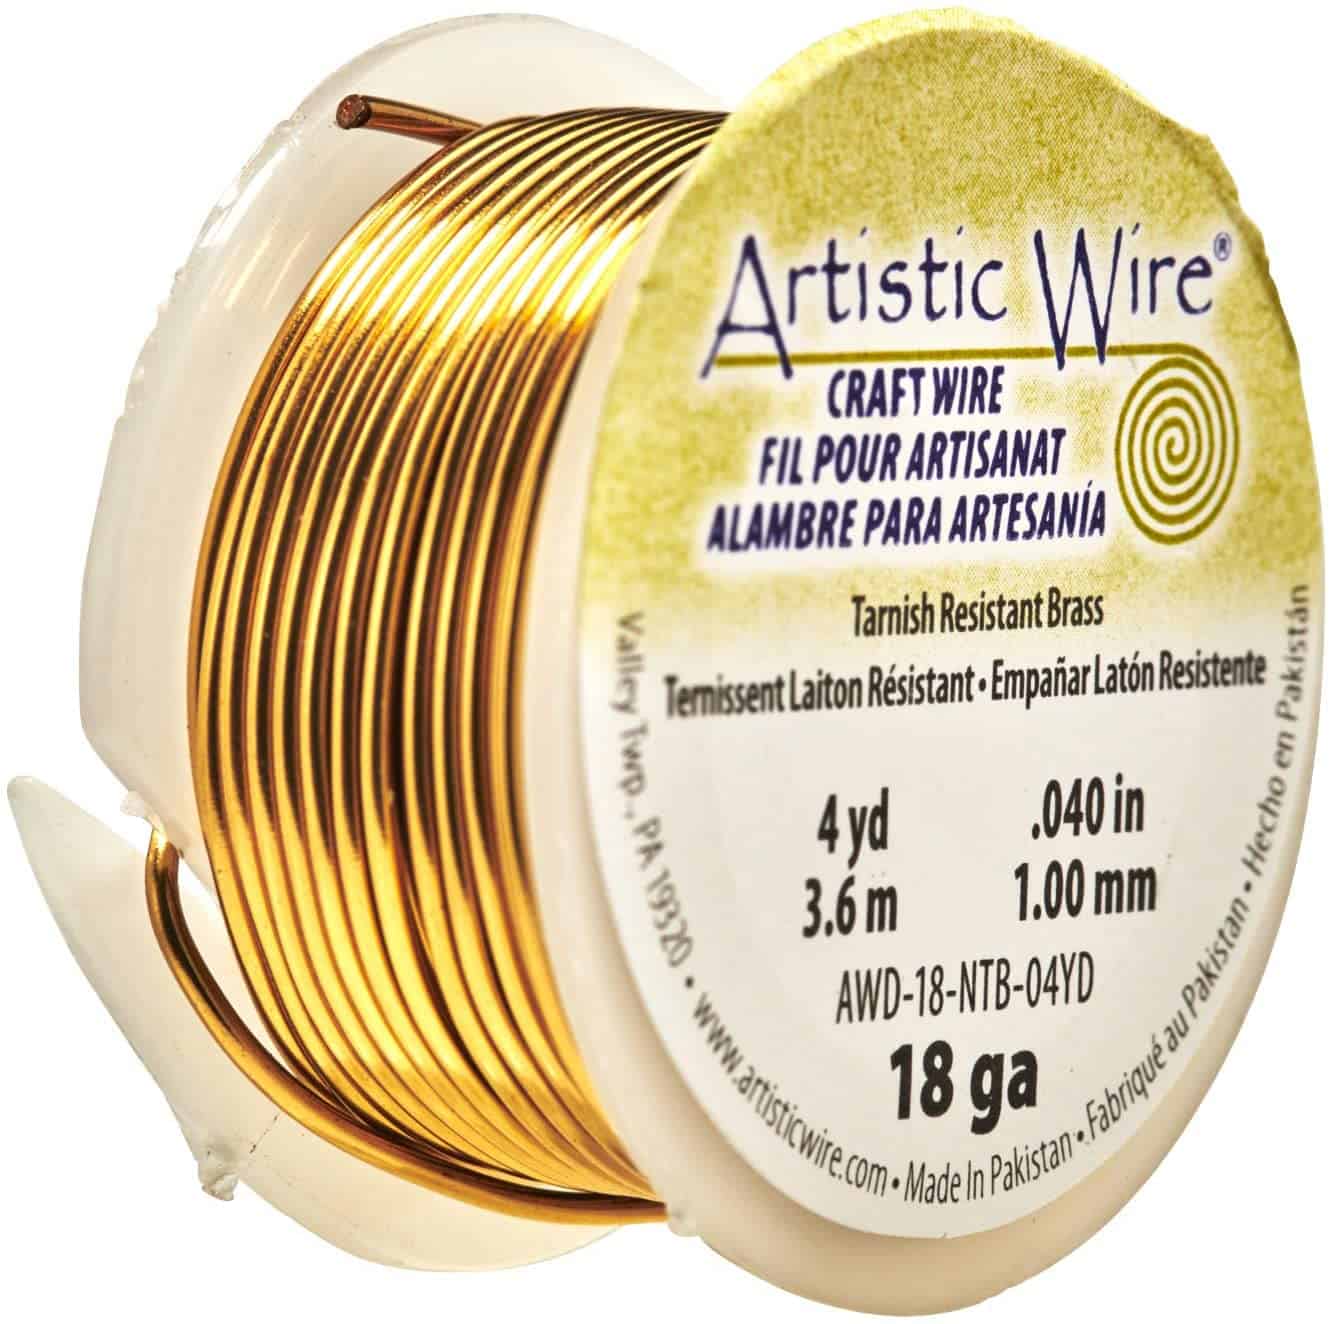 Best brass wire for stop motion- Artistic Wire 18 Gauge Tarnish Resistant